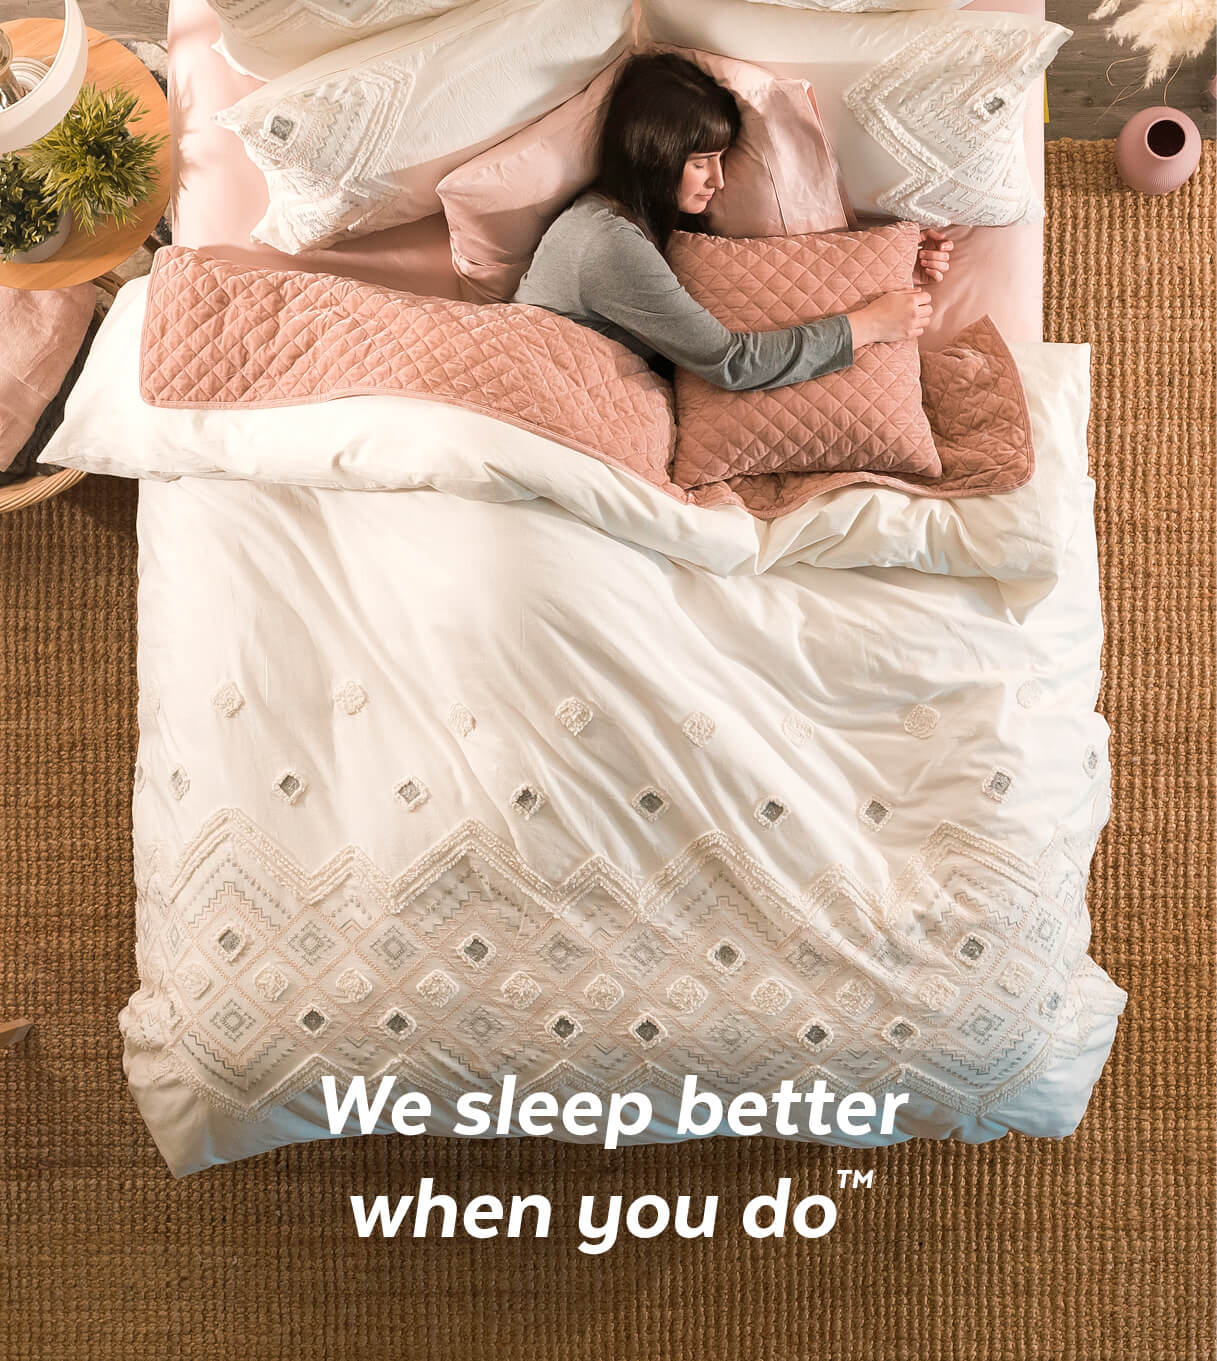 Woman sleeping in Charity Bedding Collection with text overlay that says 'We sleep better when you do'